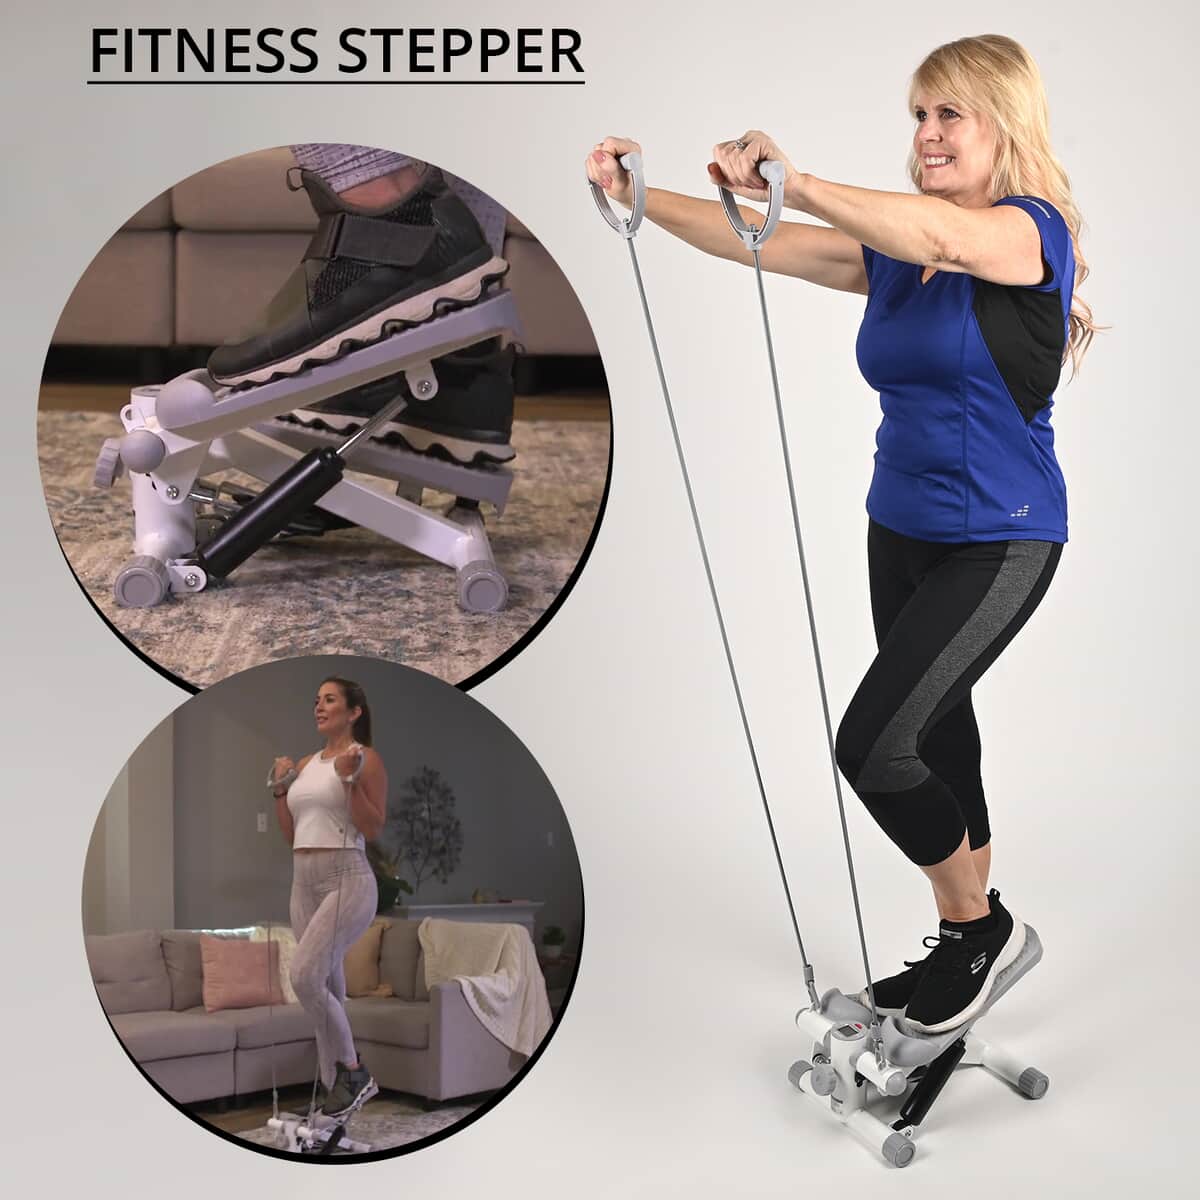 OVICX Portable Aerobic Fitness Stepper with Removable Resistance Bands image number 1